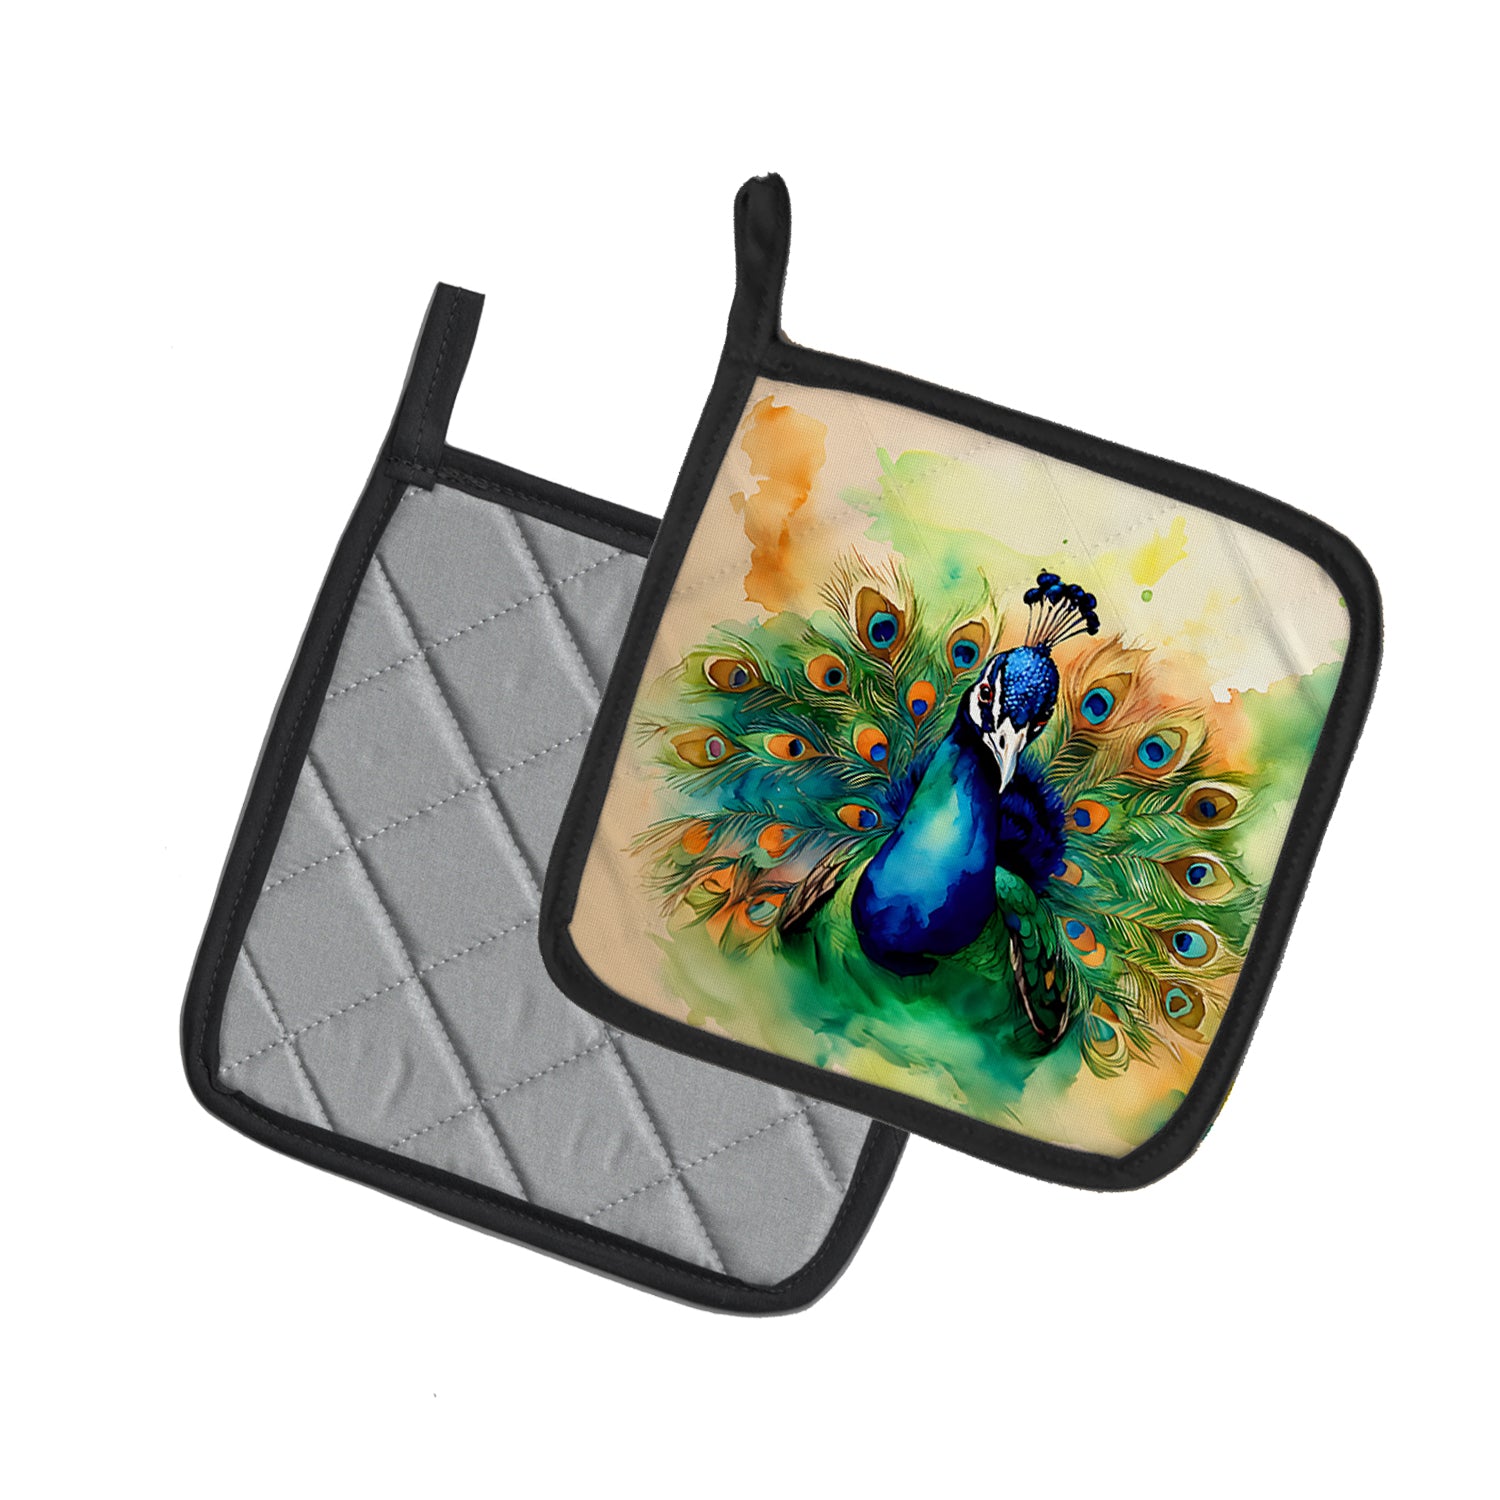 Buy this Peacock Pair of Pot Holders